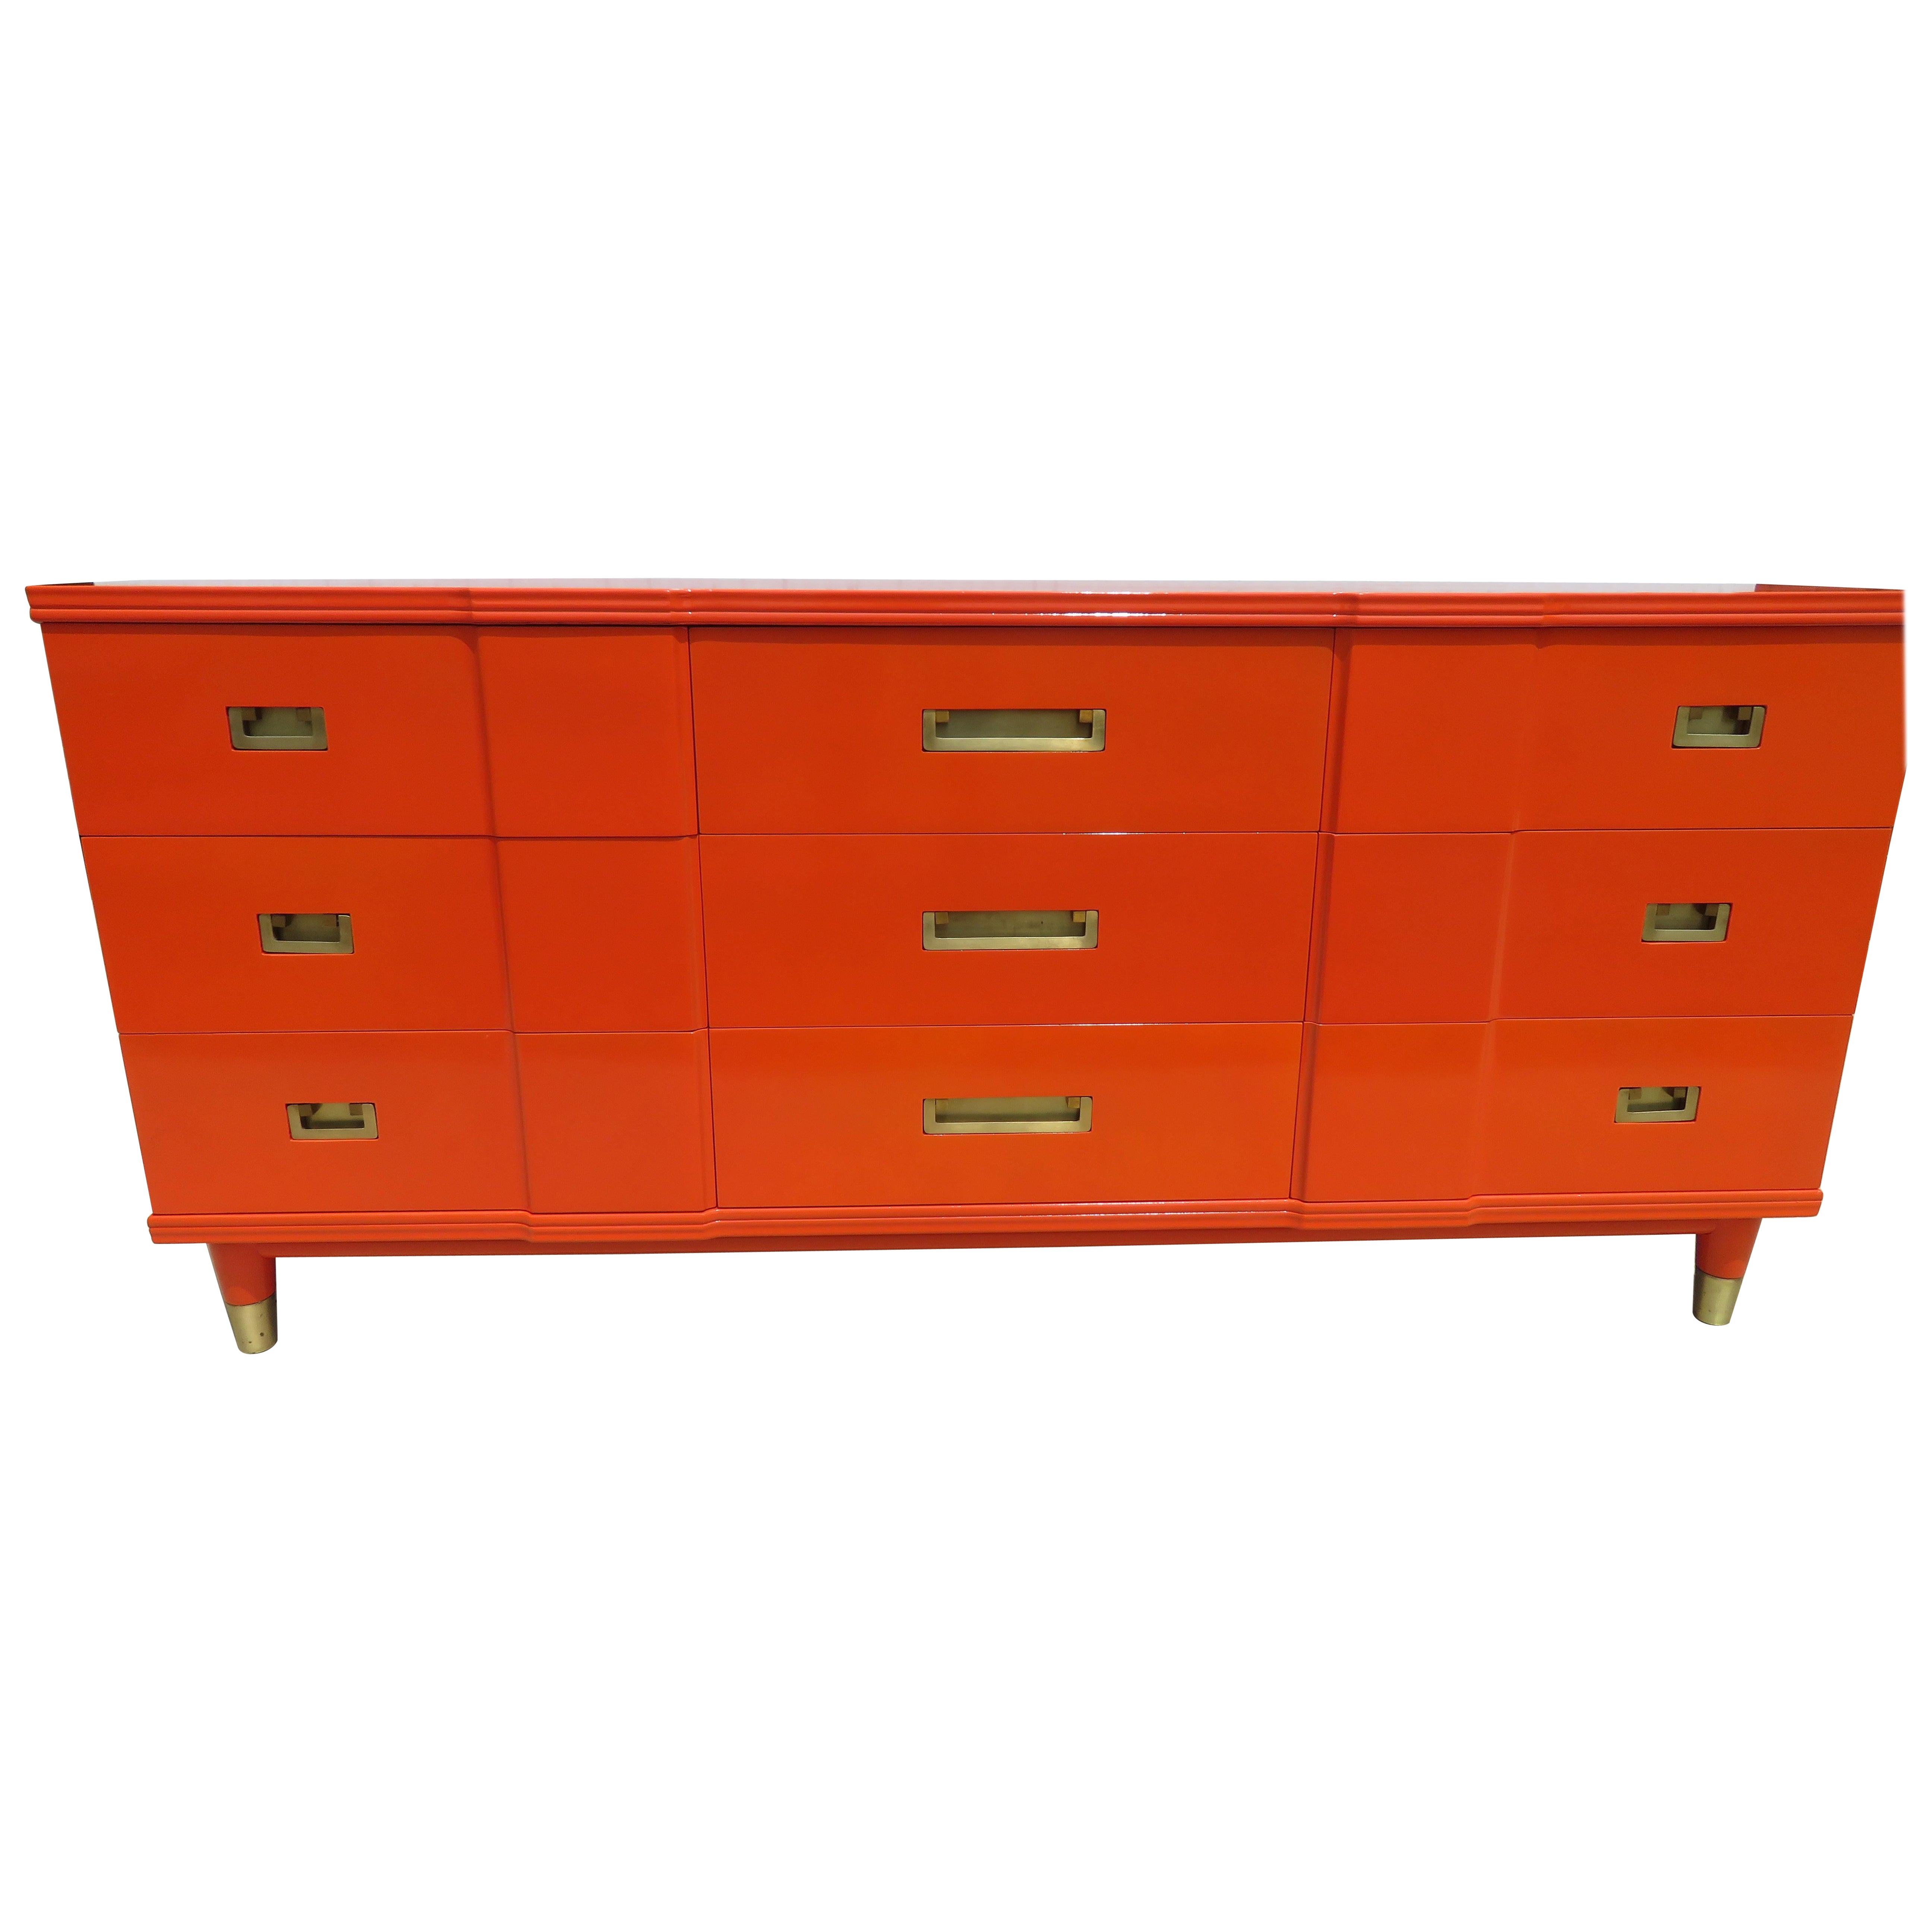 Magnificent Hermes orange lacquered John Widdicomb credenza buffet. We love the Asian Campaign style this high-end vintage piece has. This lovely credenza has been totally restored to even better than new with its high gloss Hermes orange lacquer